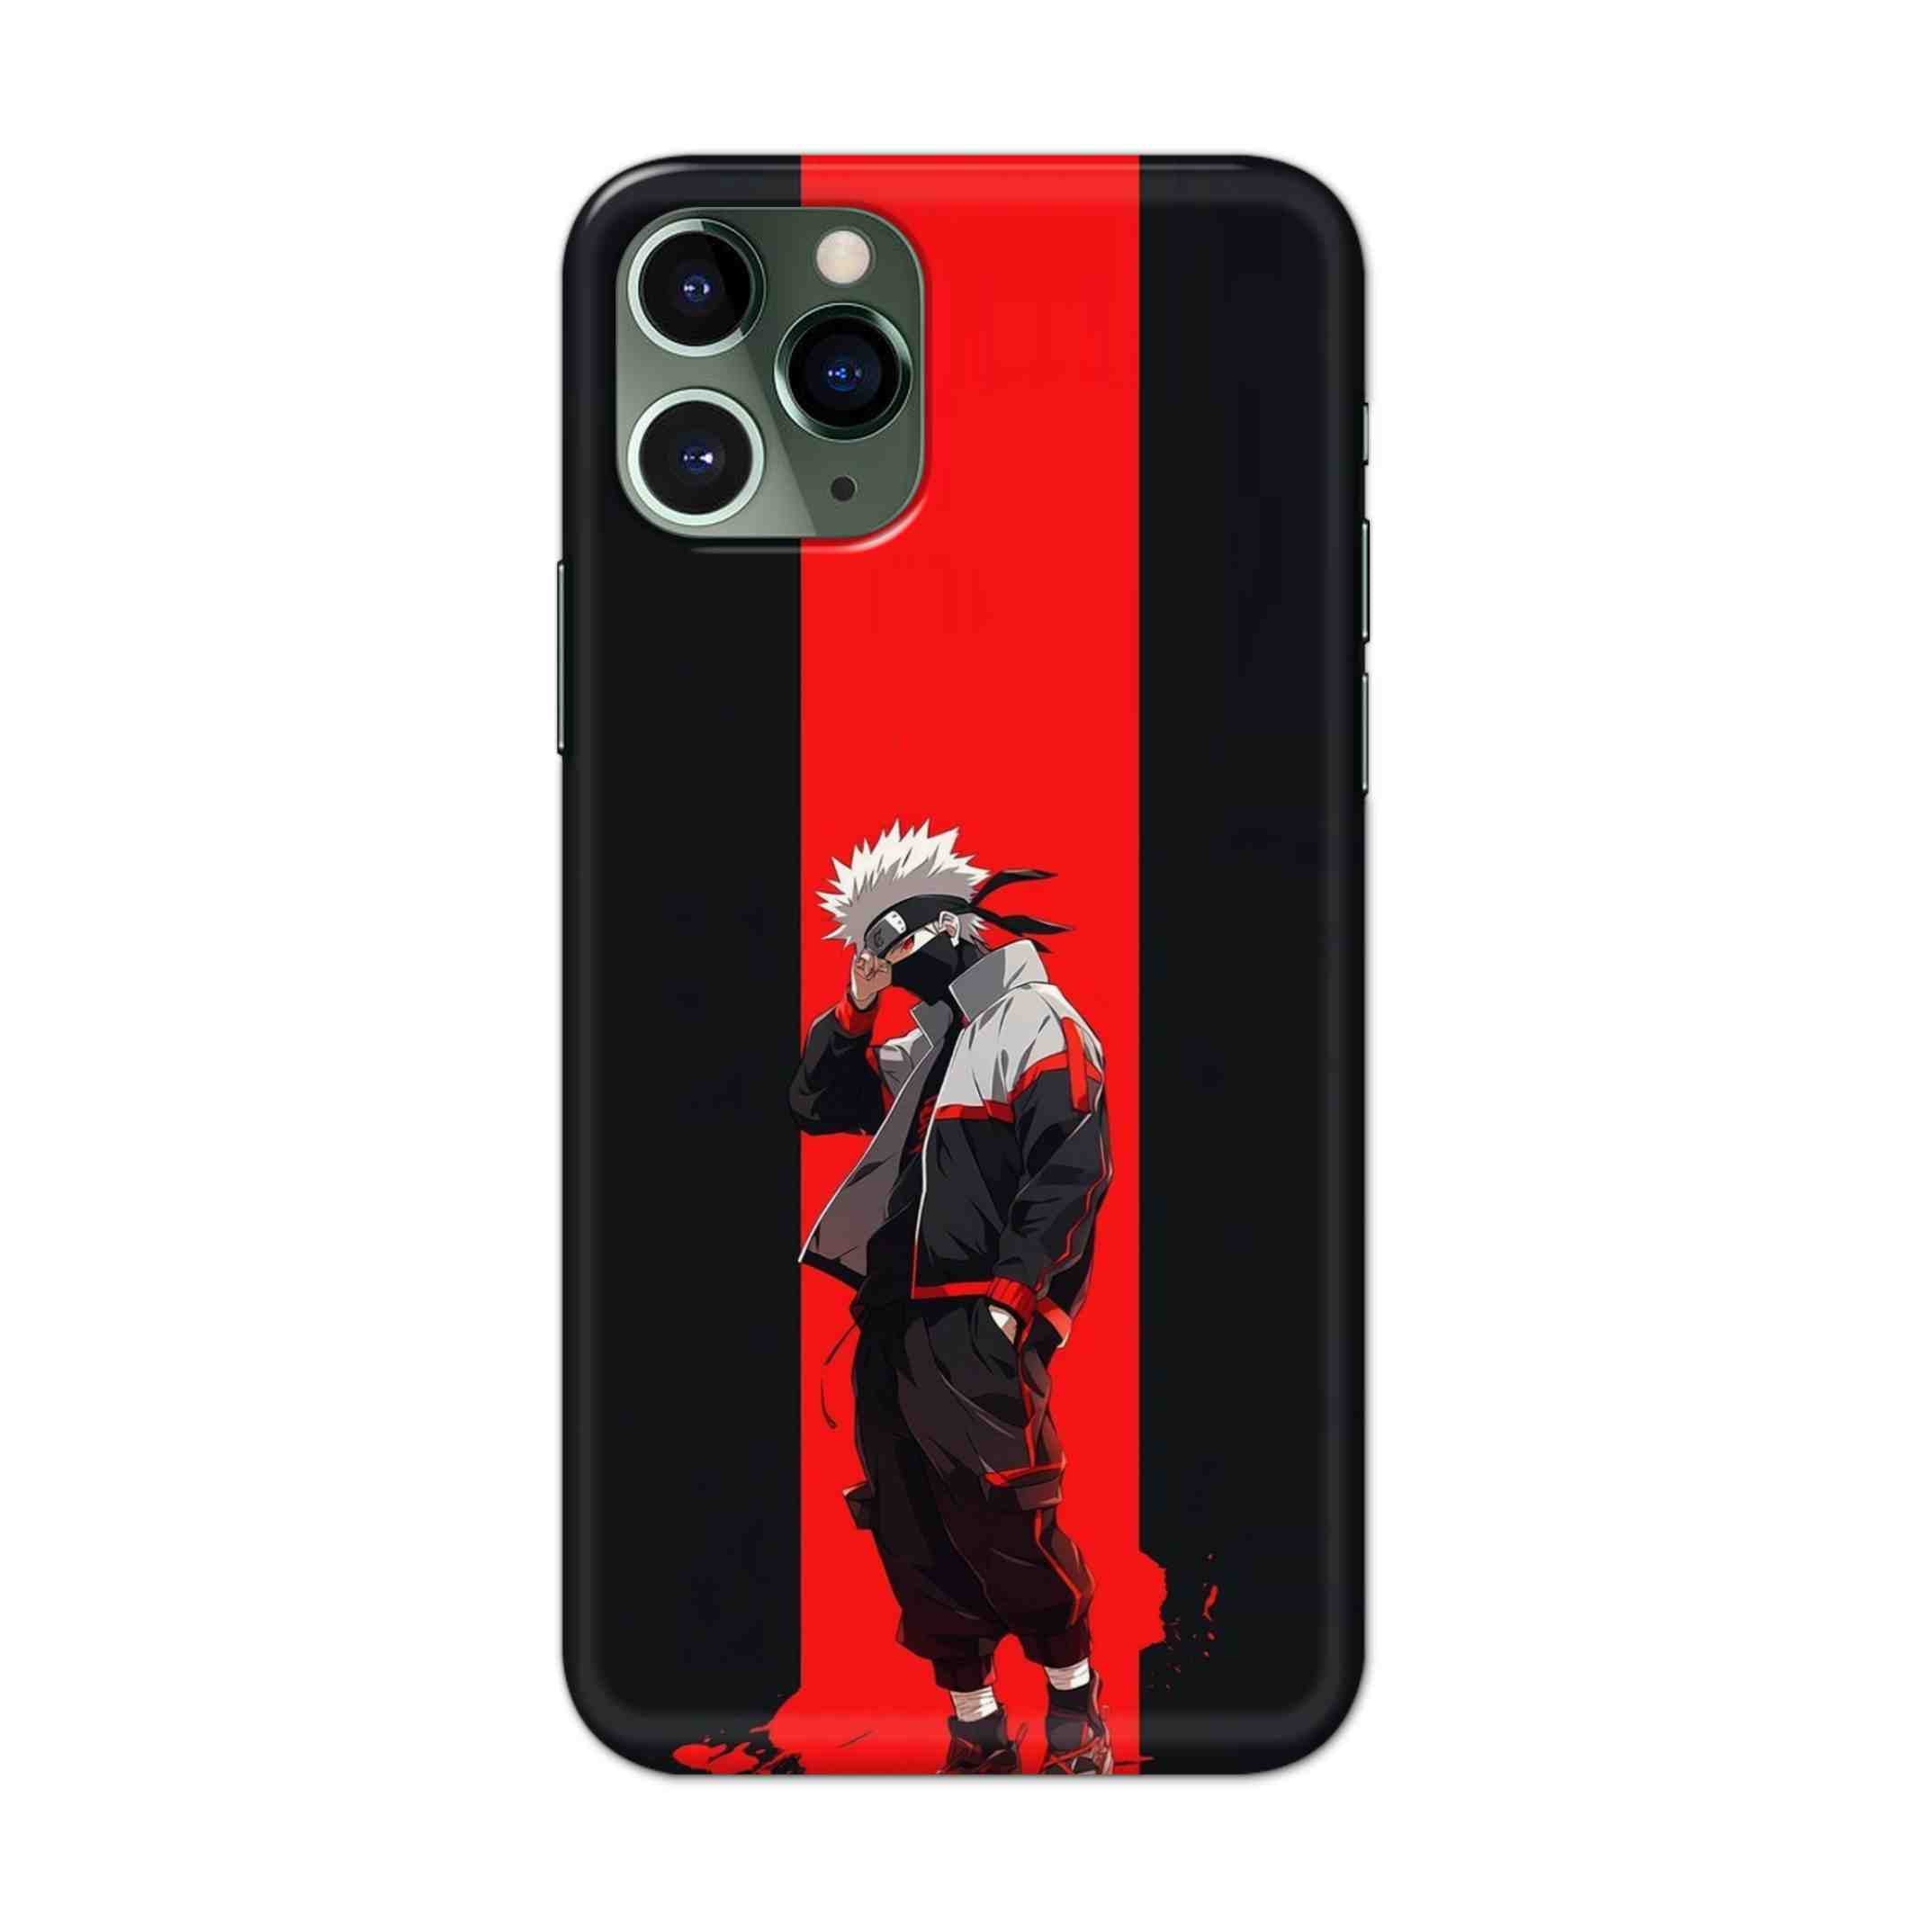 Buy Steins Hard Back Mobile Phone Case/Cover For iPhone 11 Pro Online